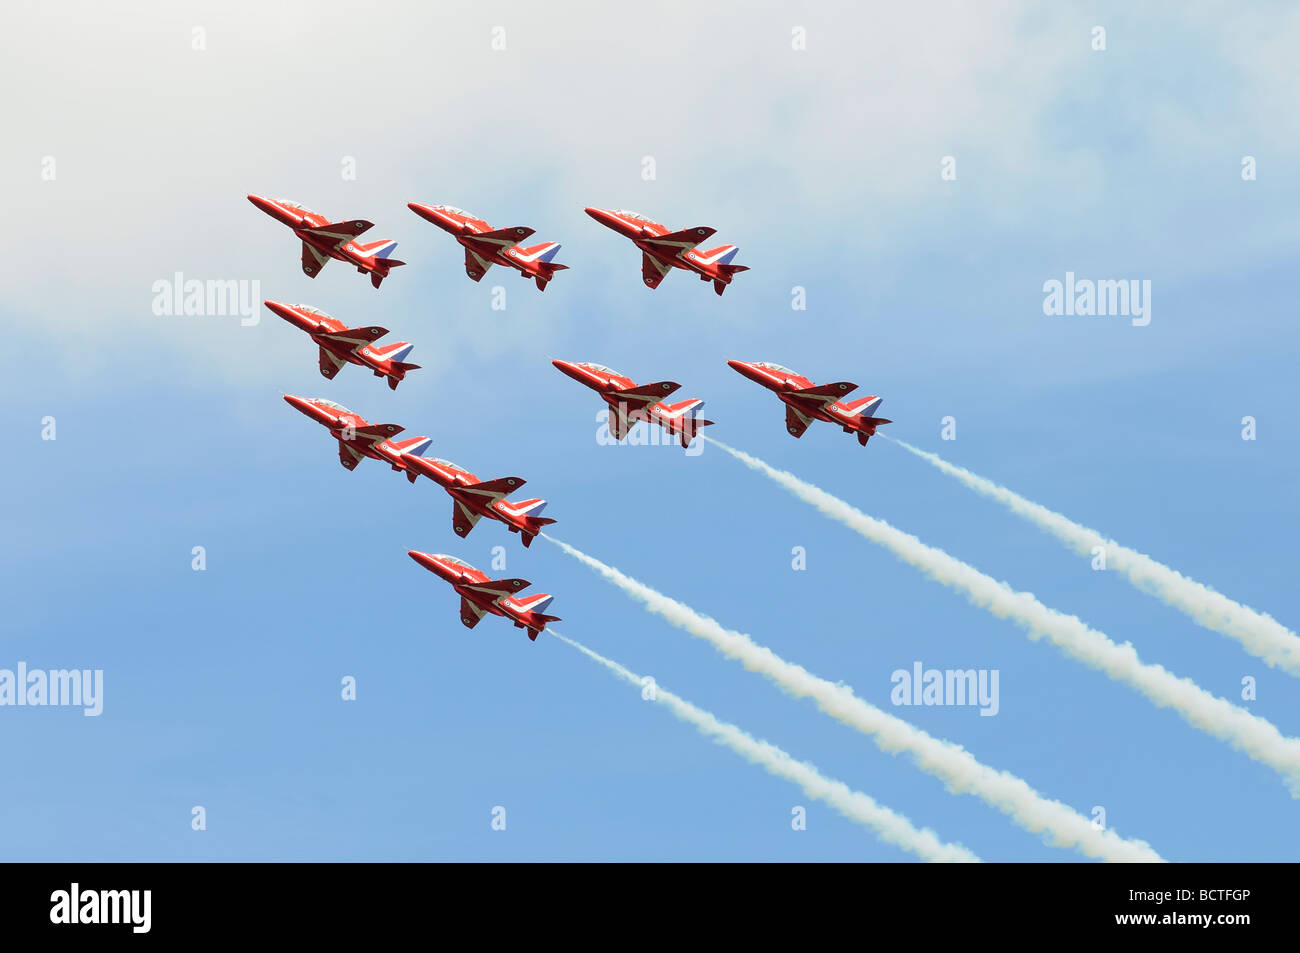 The Royal Air Force Red Arrows aerobatic display team in perfect formation at the 2009 Royal International Air Tattoo RAF Fairfo Stock Photo